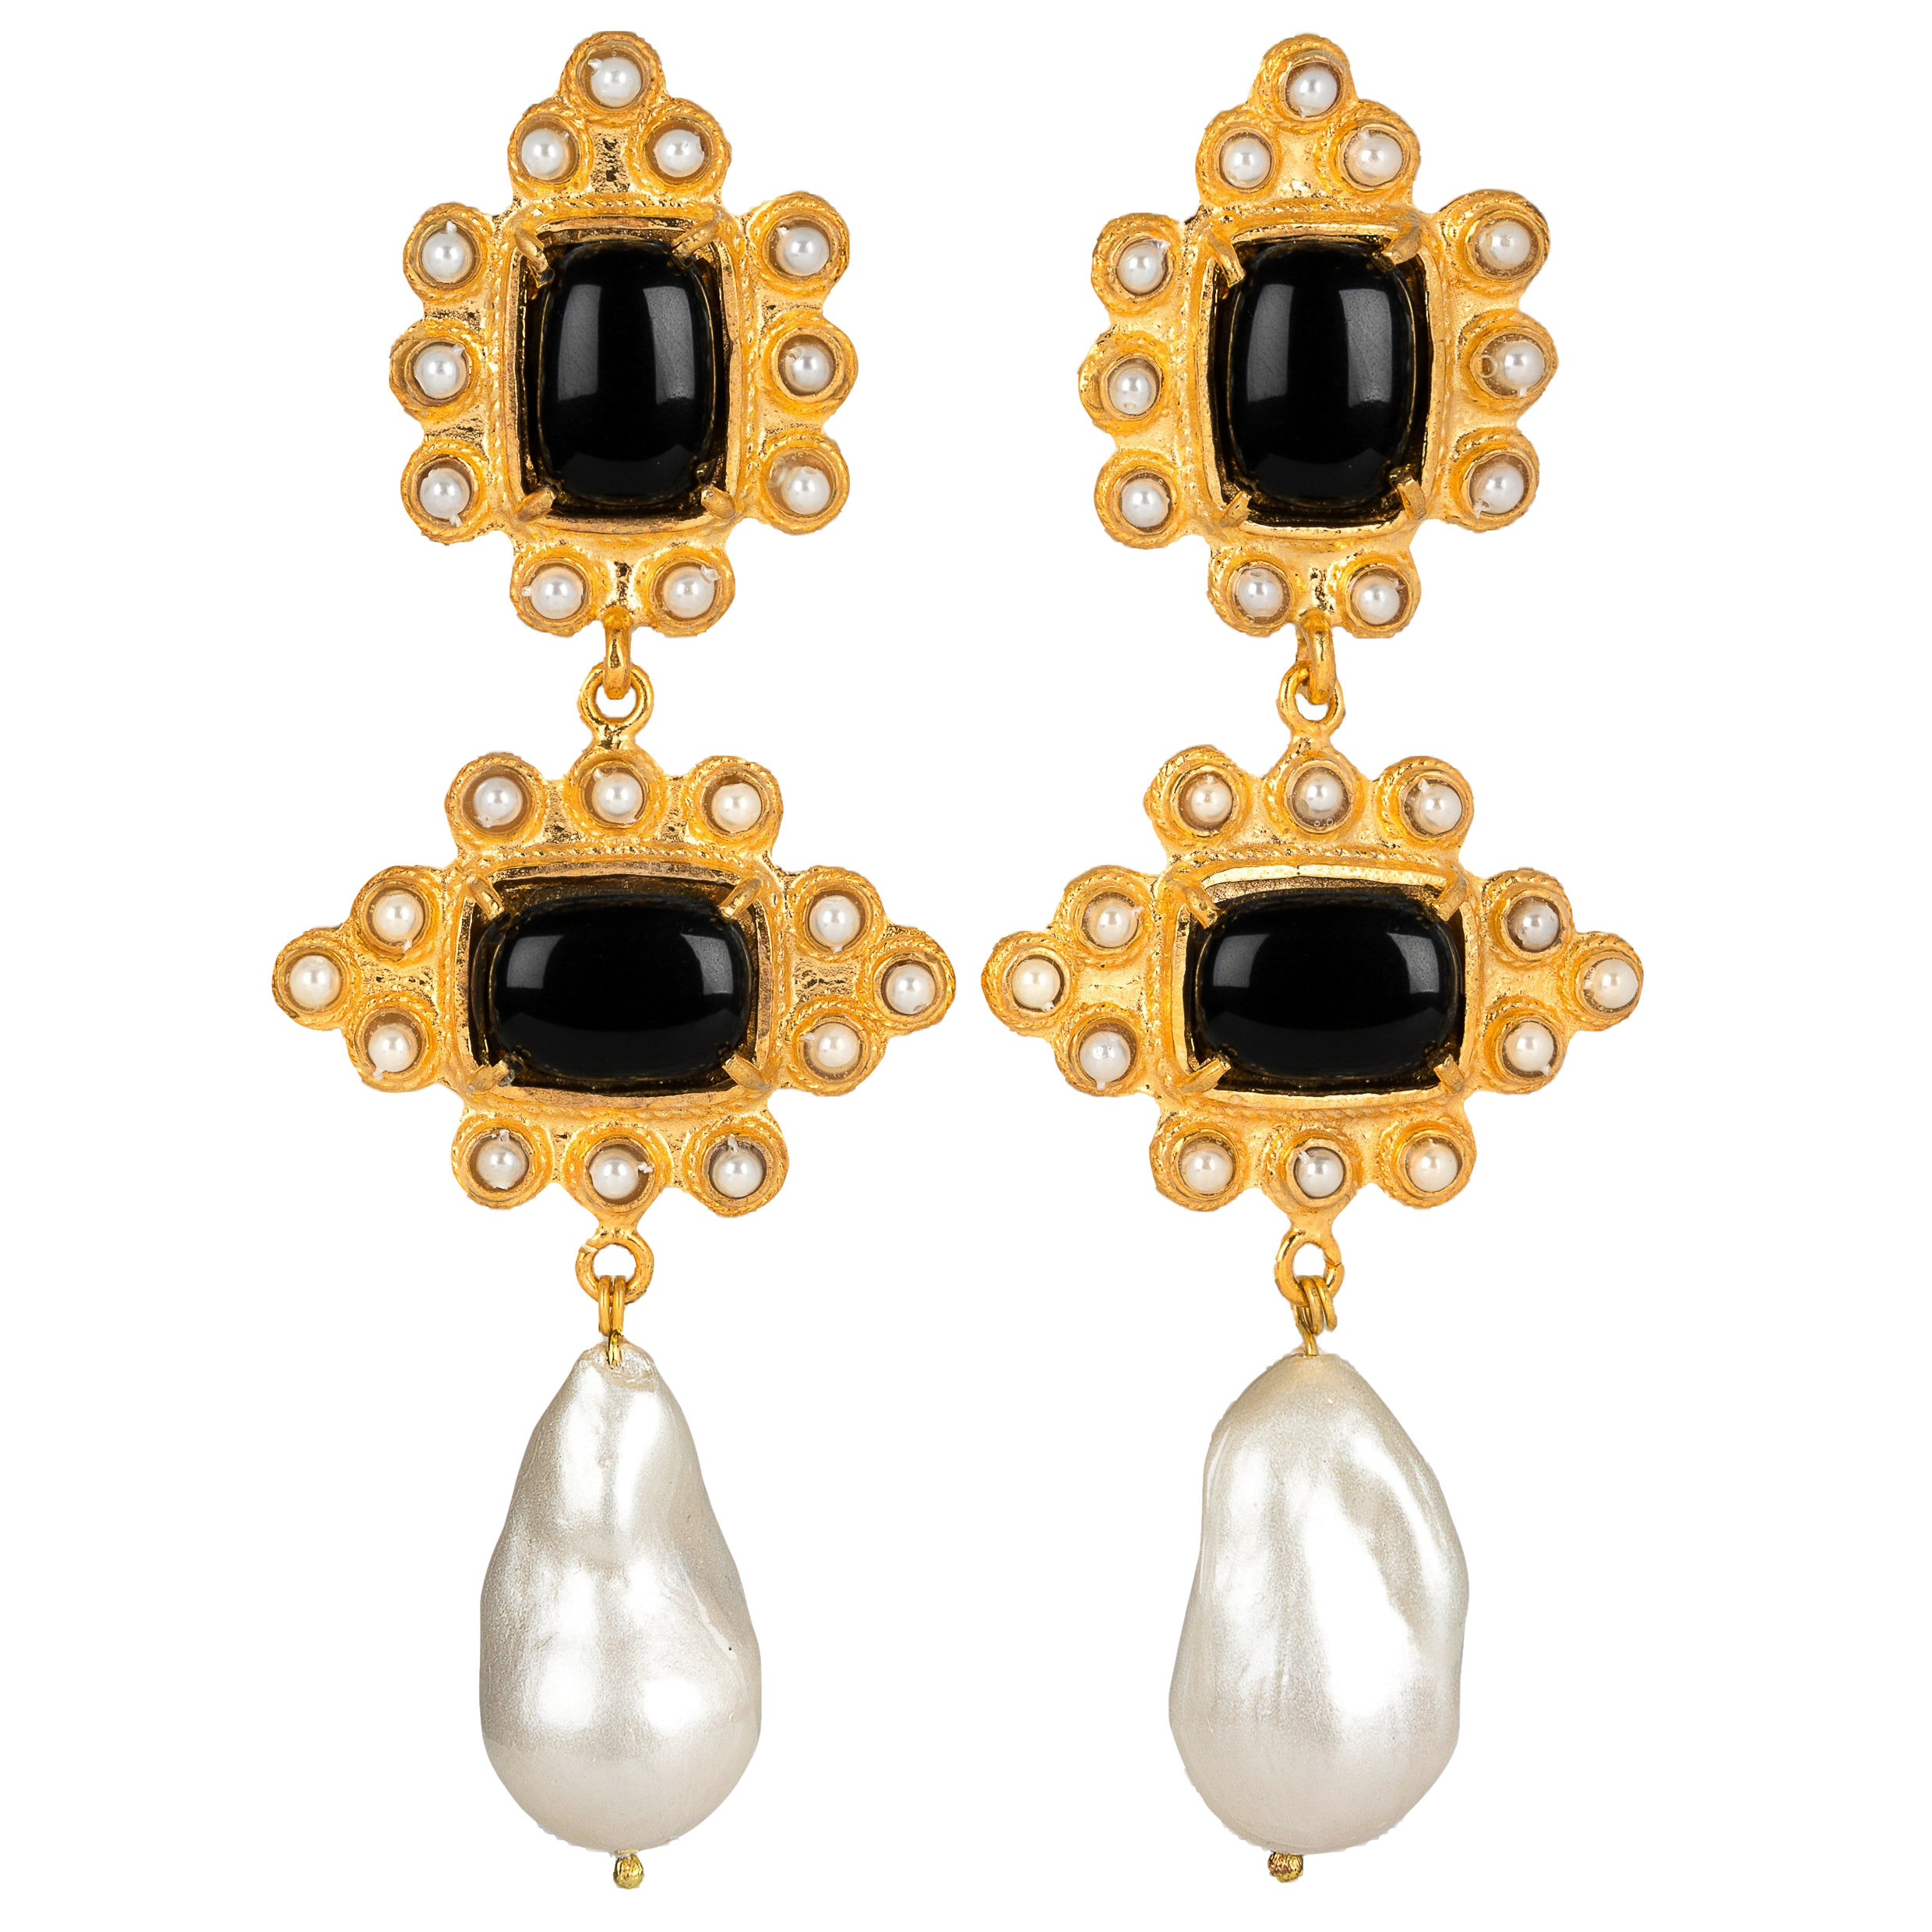 Christie Nicolaides Graciela Earrings Black In Gold